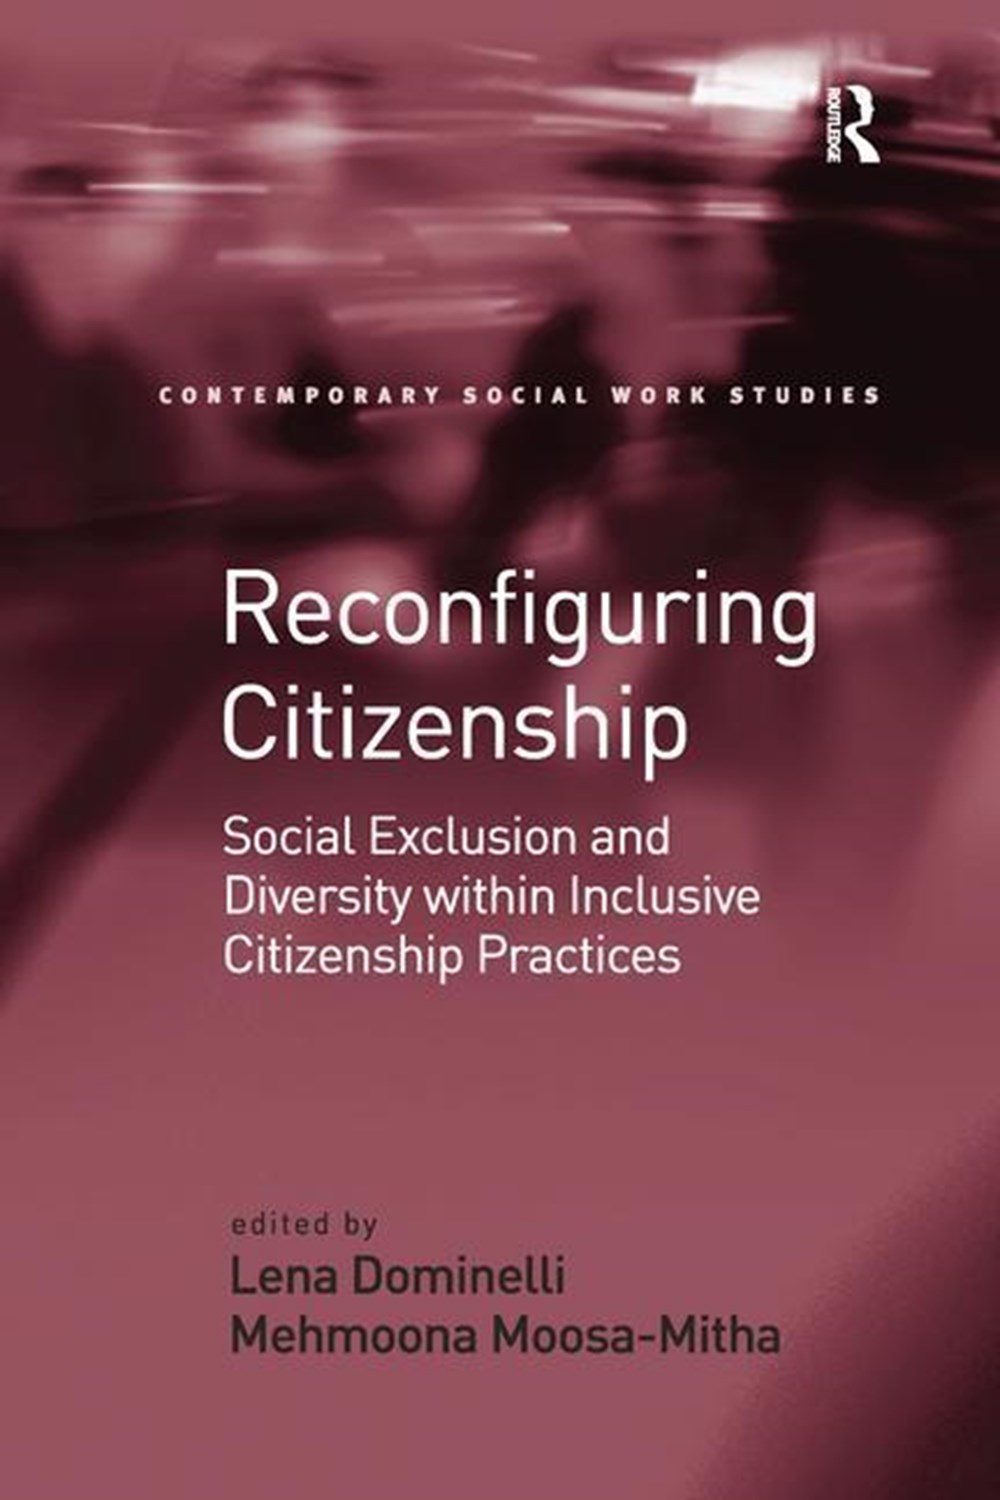 Reconfiguring Citizenship: Social Exclusion and Diversity within Inclusive Citizenship Practices